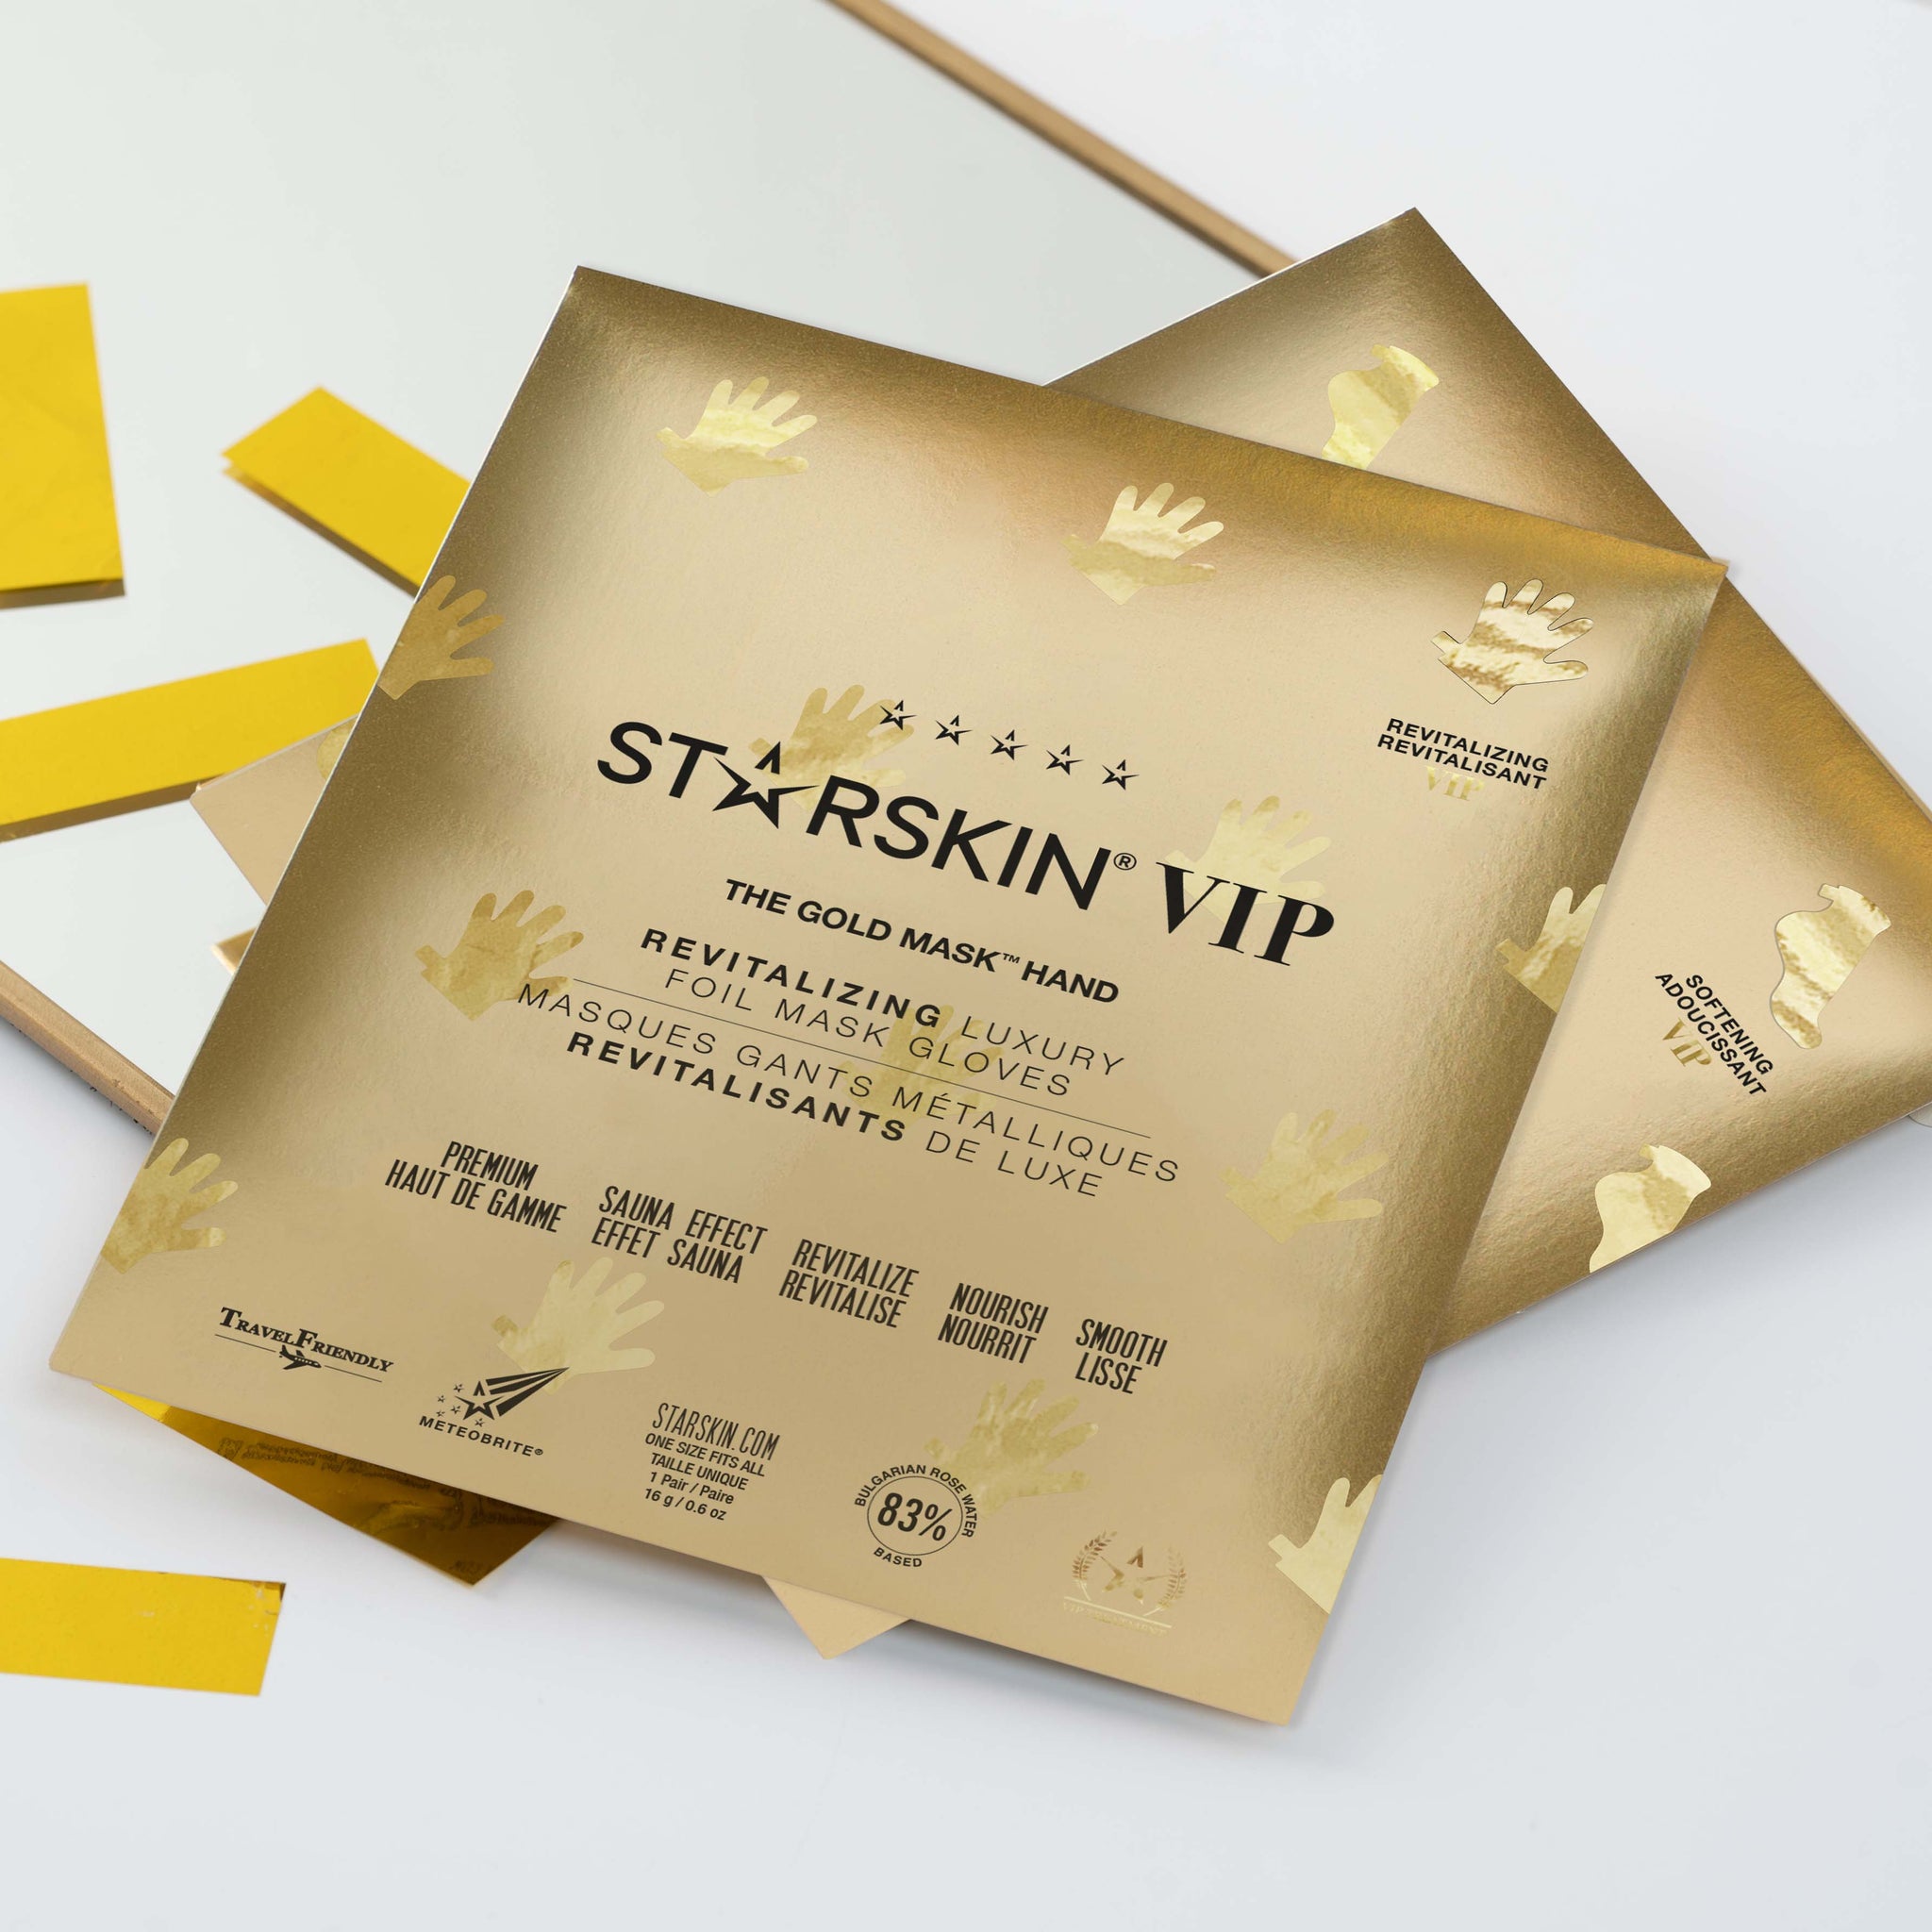 Starskin Gold Mask - Hand product packaging in the middle of the image. It's on top of a small mirror and the background of the image is white.